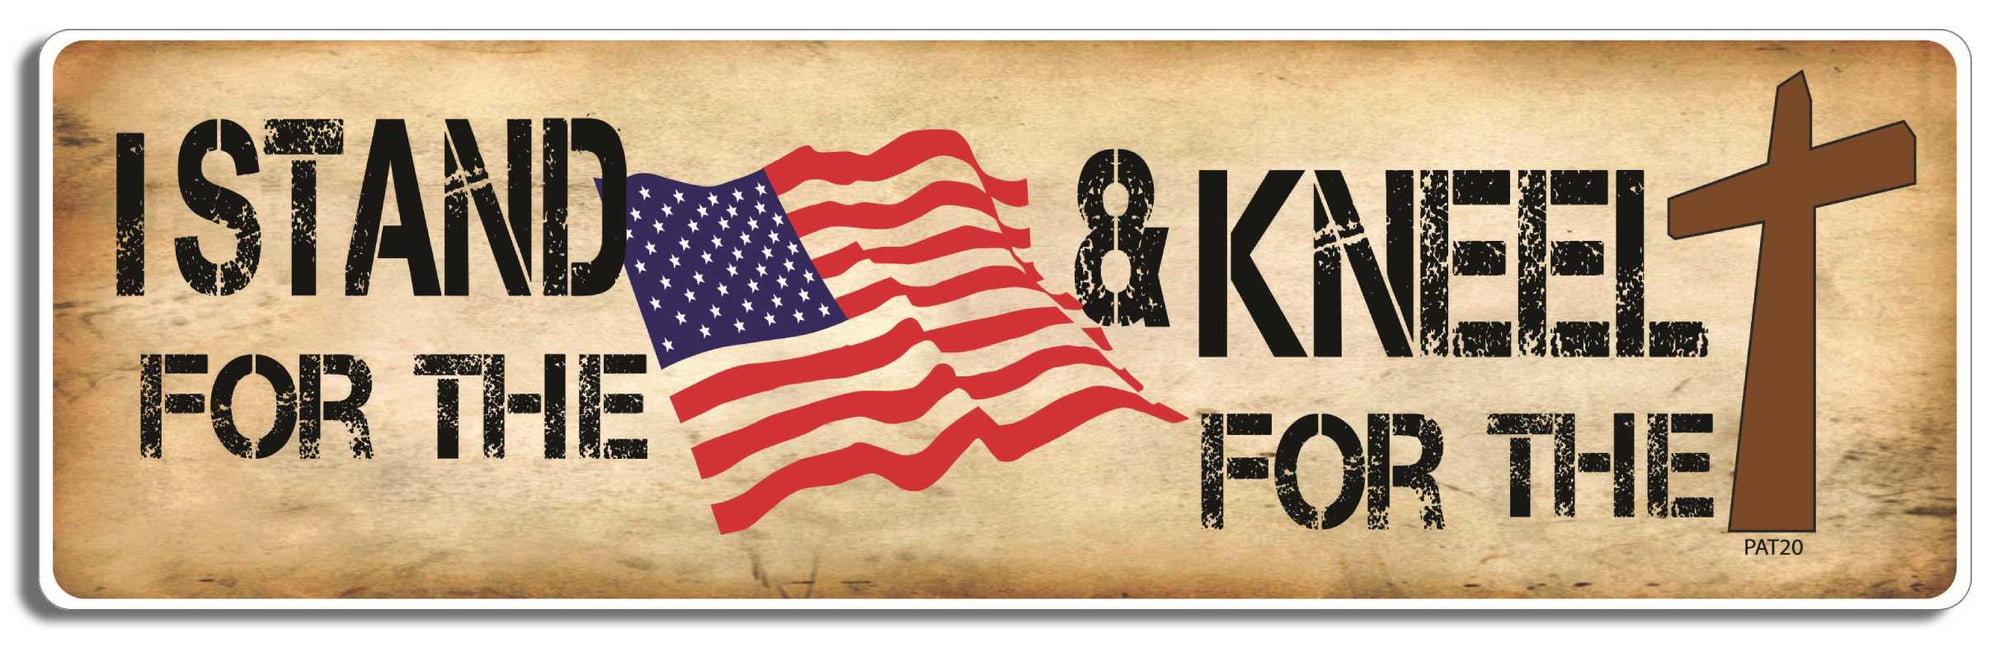 I stand for the flag and kneel for the cross -  3" x 10" Bumper Sticker--Car Magnet- -  Decal Bumper Sticker-patriotic Bumper Sticker Car Magnet I stand for the flag and kneel for-  Decal for cars4th july, american flag, christian, cross, crucifix, jesus, love america, love usa, patriot, patriotic, stars and stripes